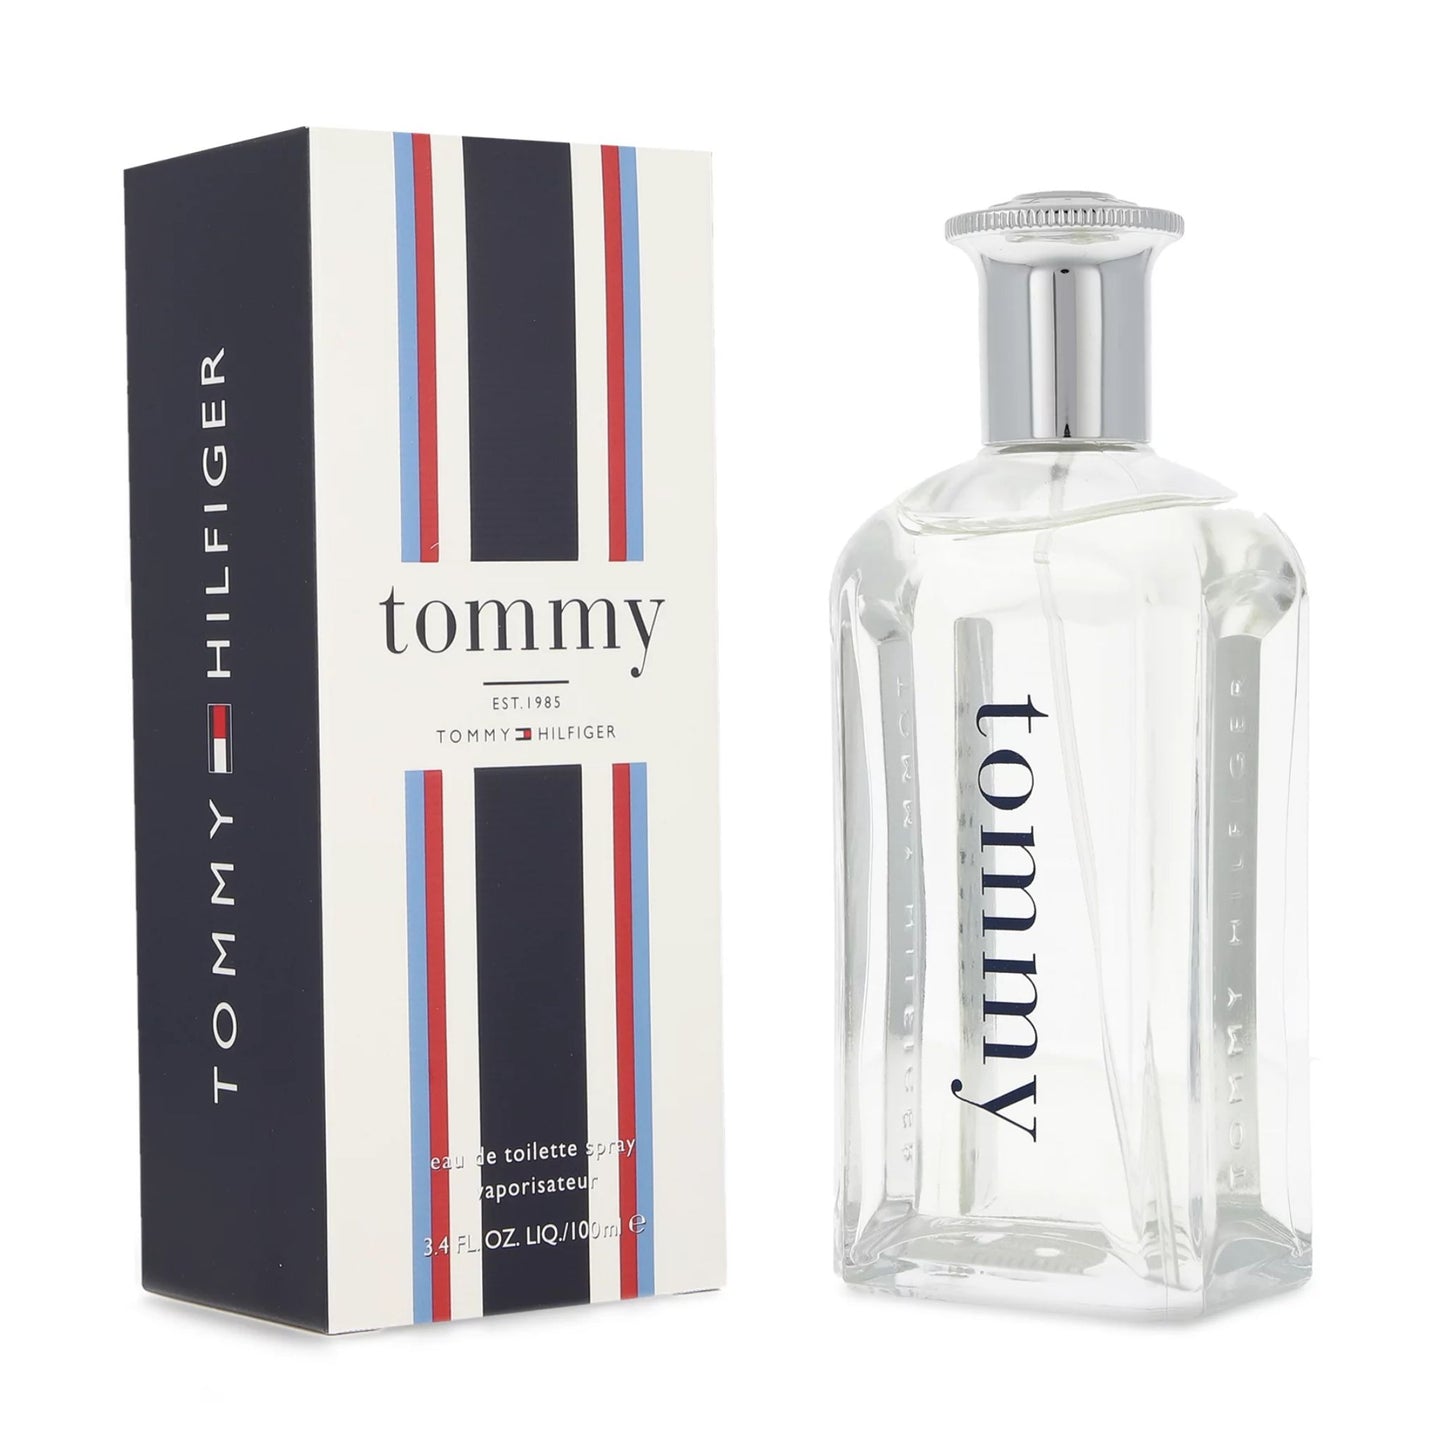 Fragancia para hombre Tommy Hilfiger Tommy 100 ml Edt